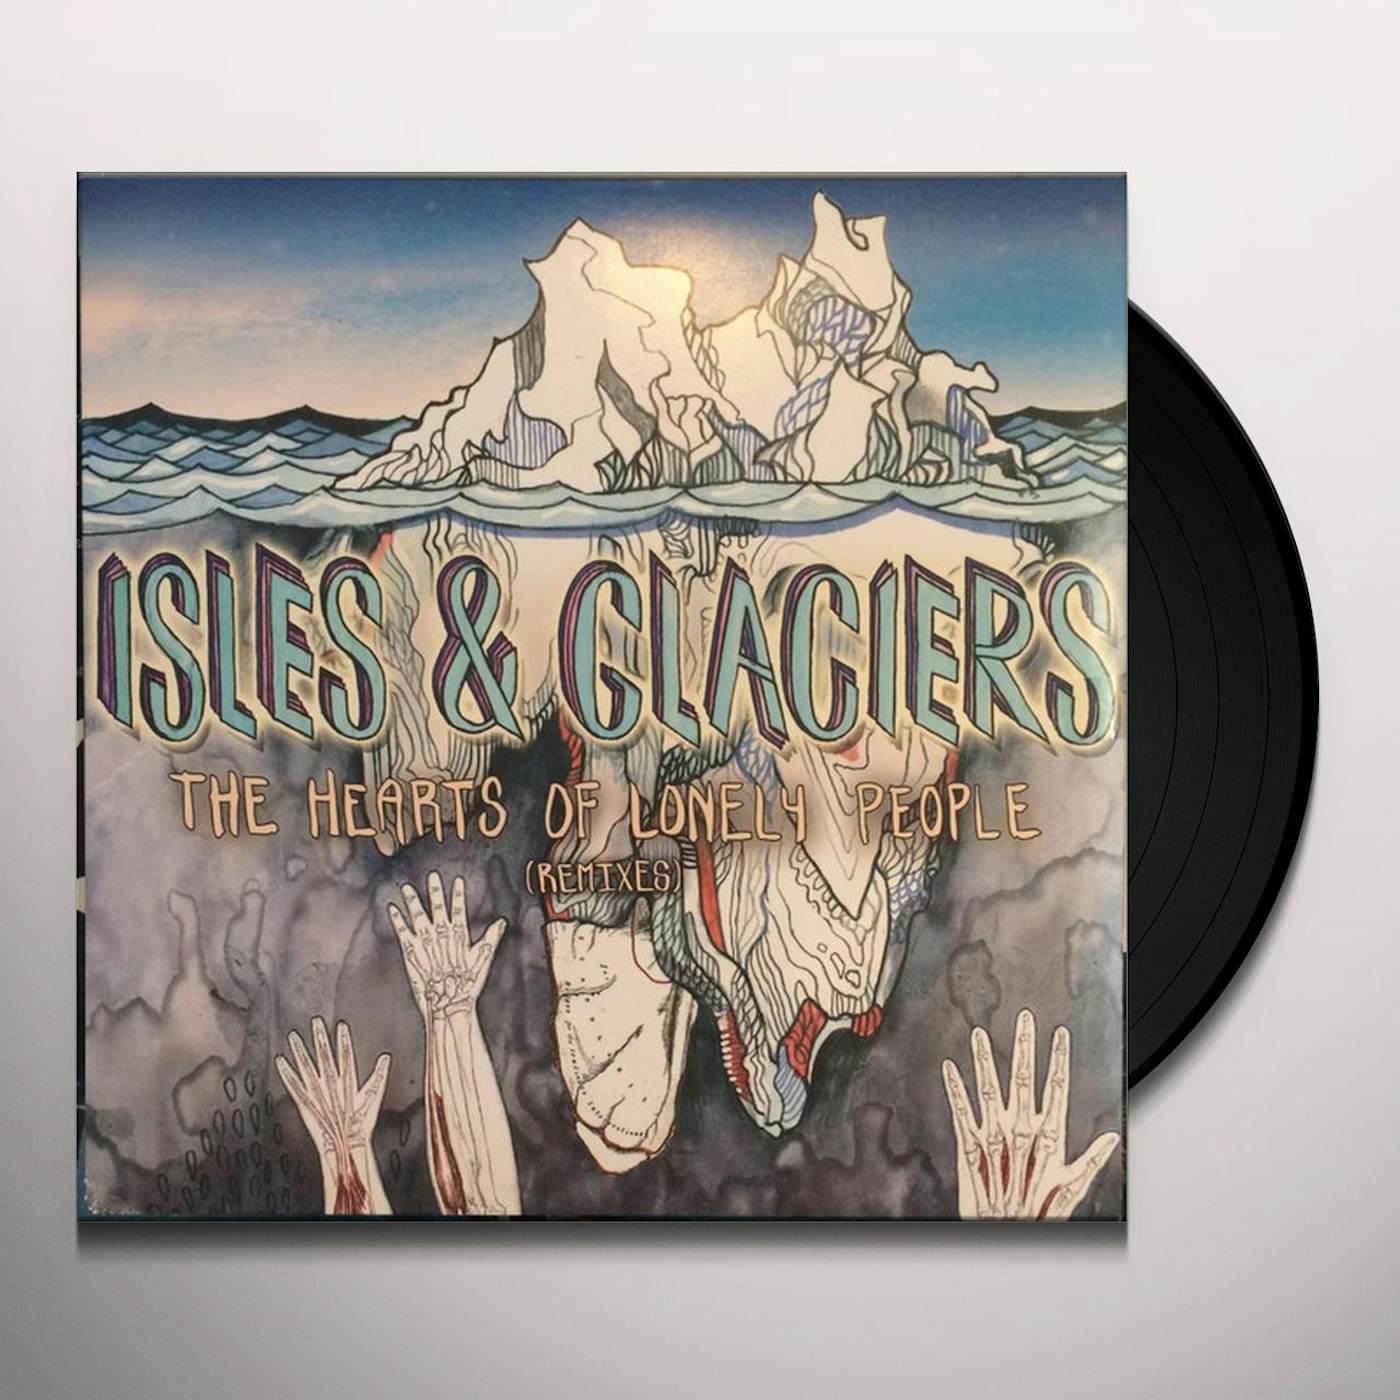 Isles & Glaciers Hearts Of Lonely People (Remixes) Vinyl Record